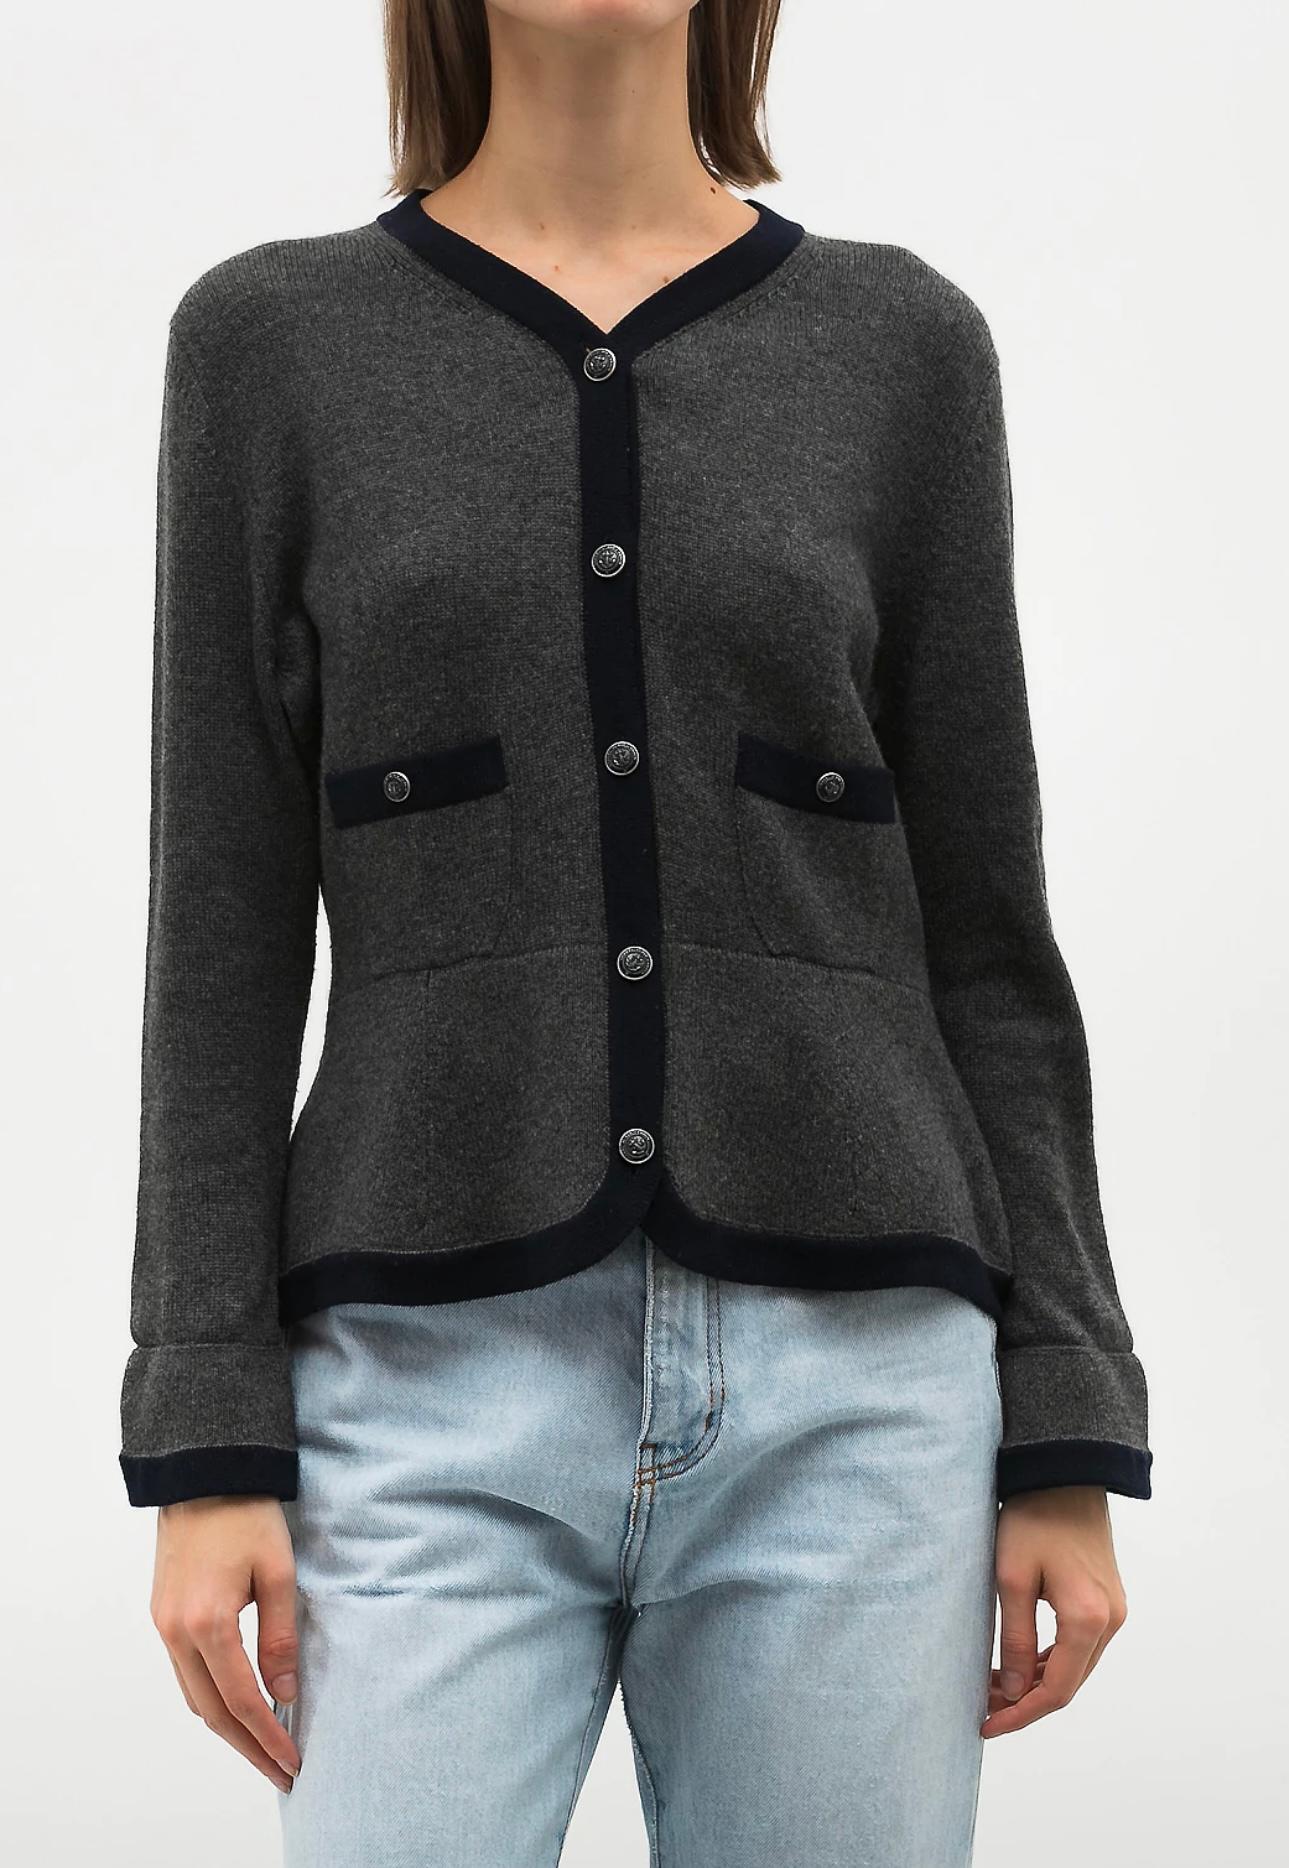 Chanel Icon Sophie Coppola Style Cashmere Jacket For Sale 4